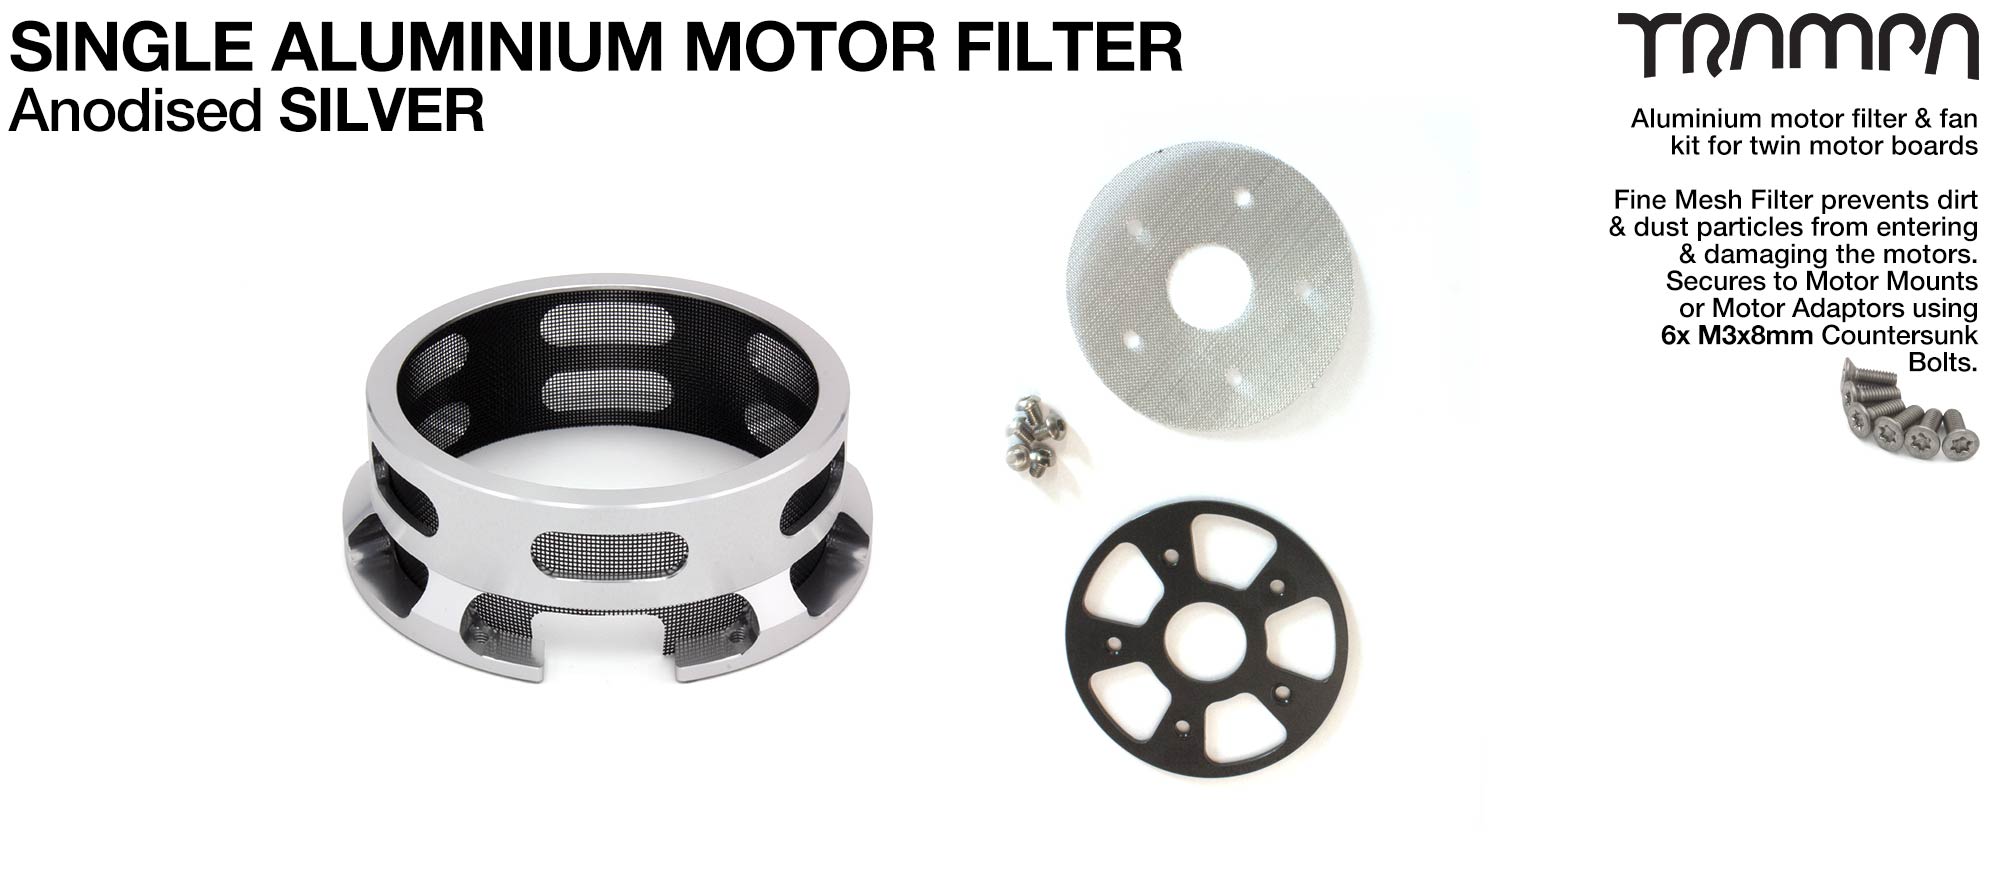 HALF CAGE Motor protection  - SILVER anodised with Filters - SINGLE